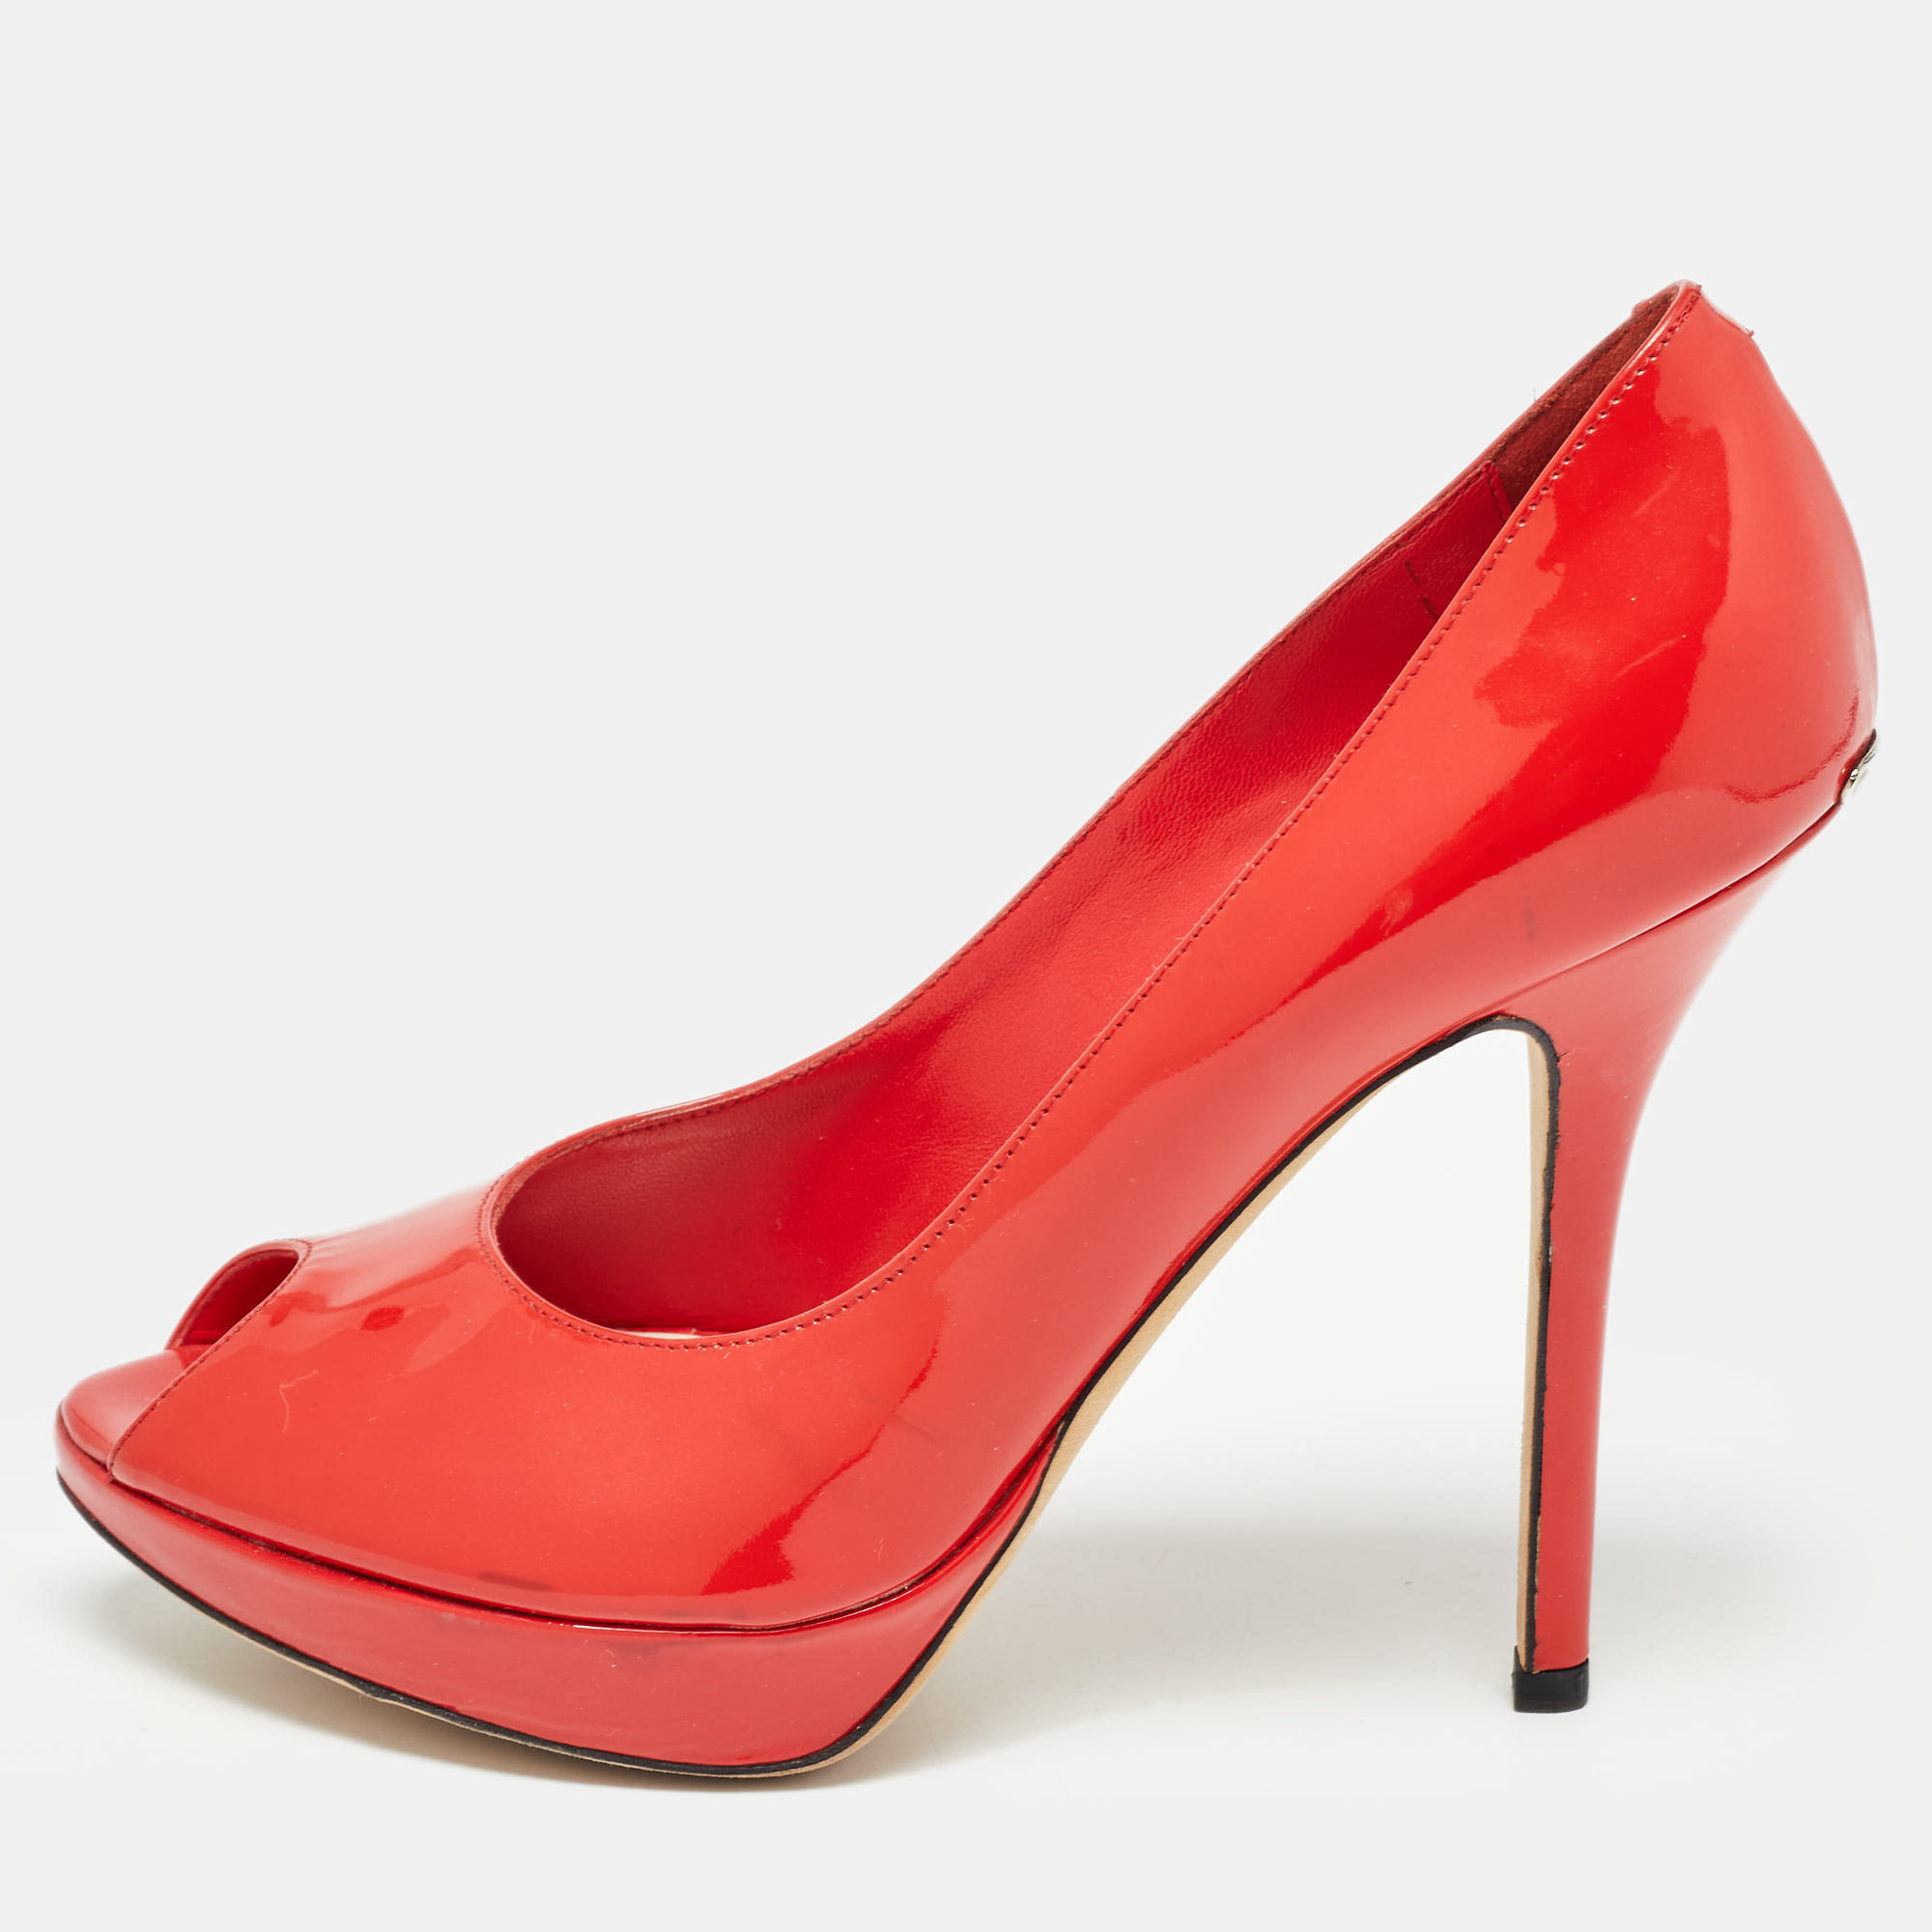 Dior red patent leather miss dior pumps size 37